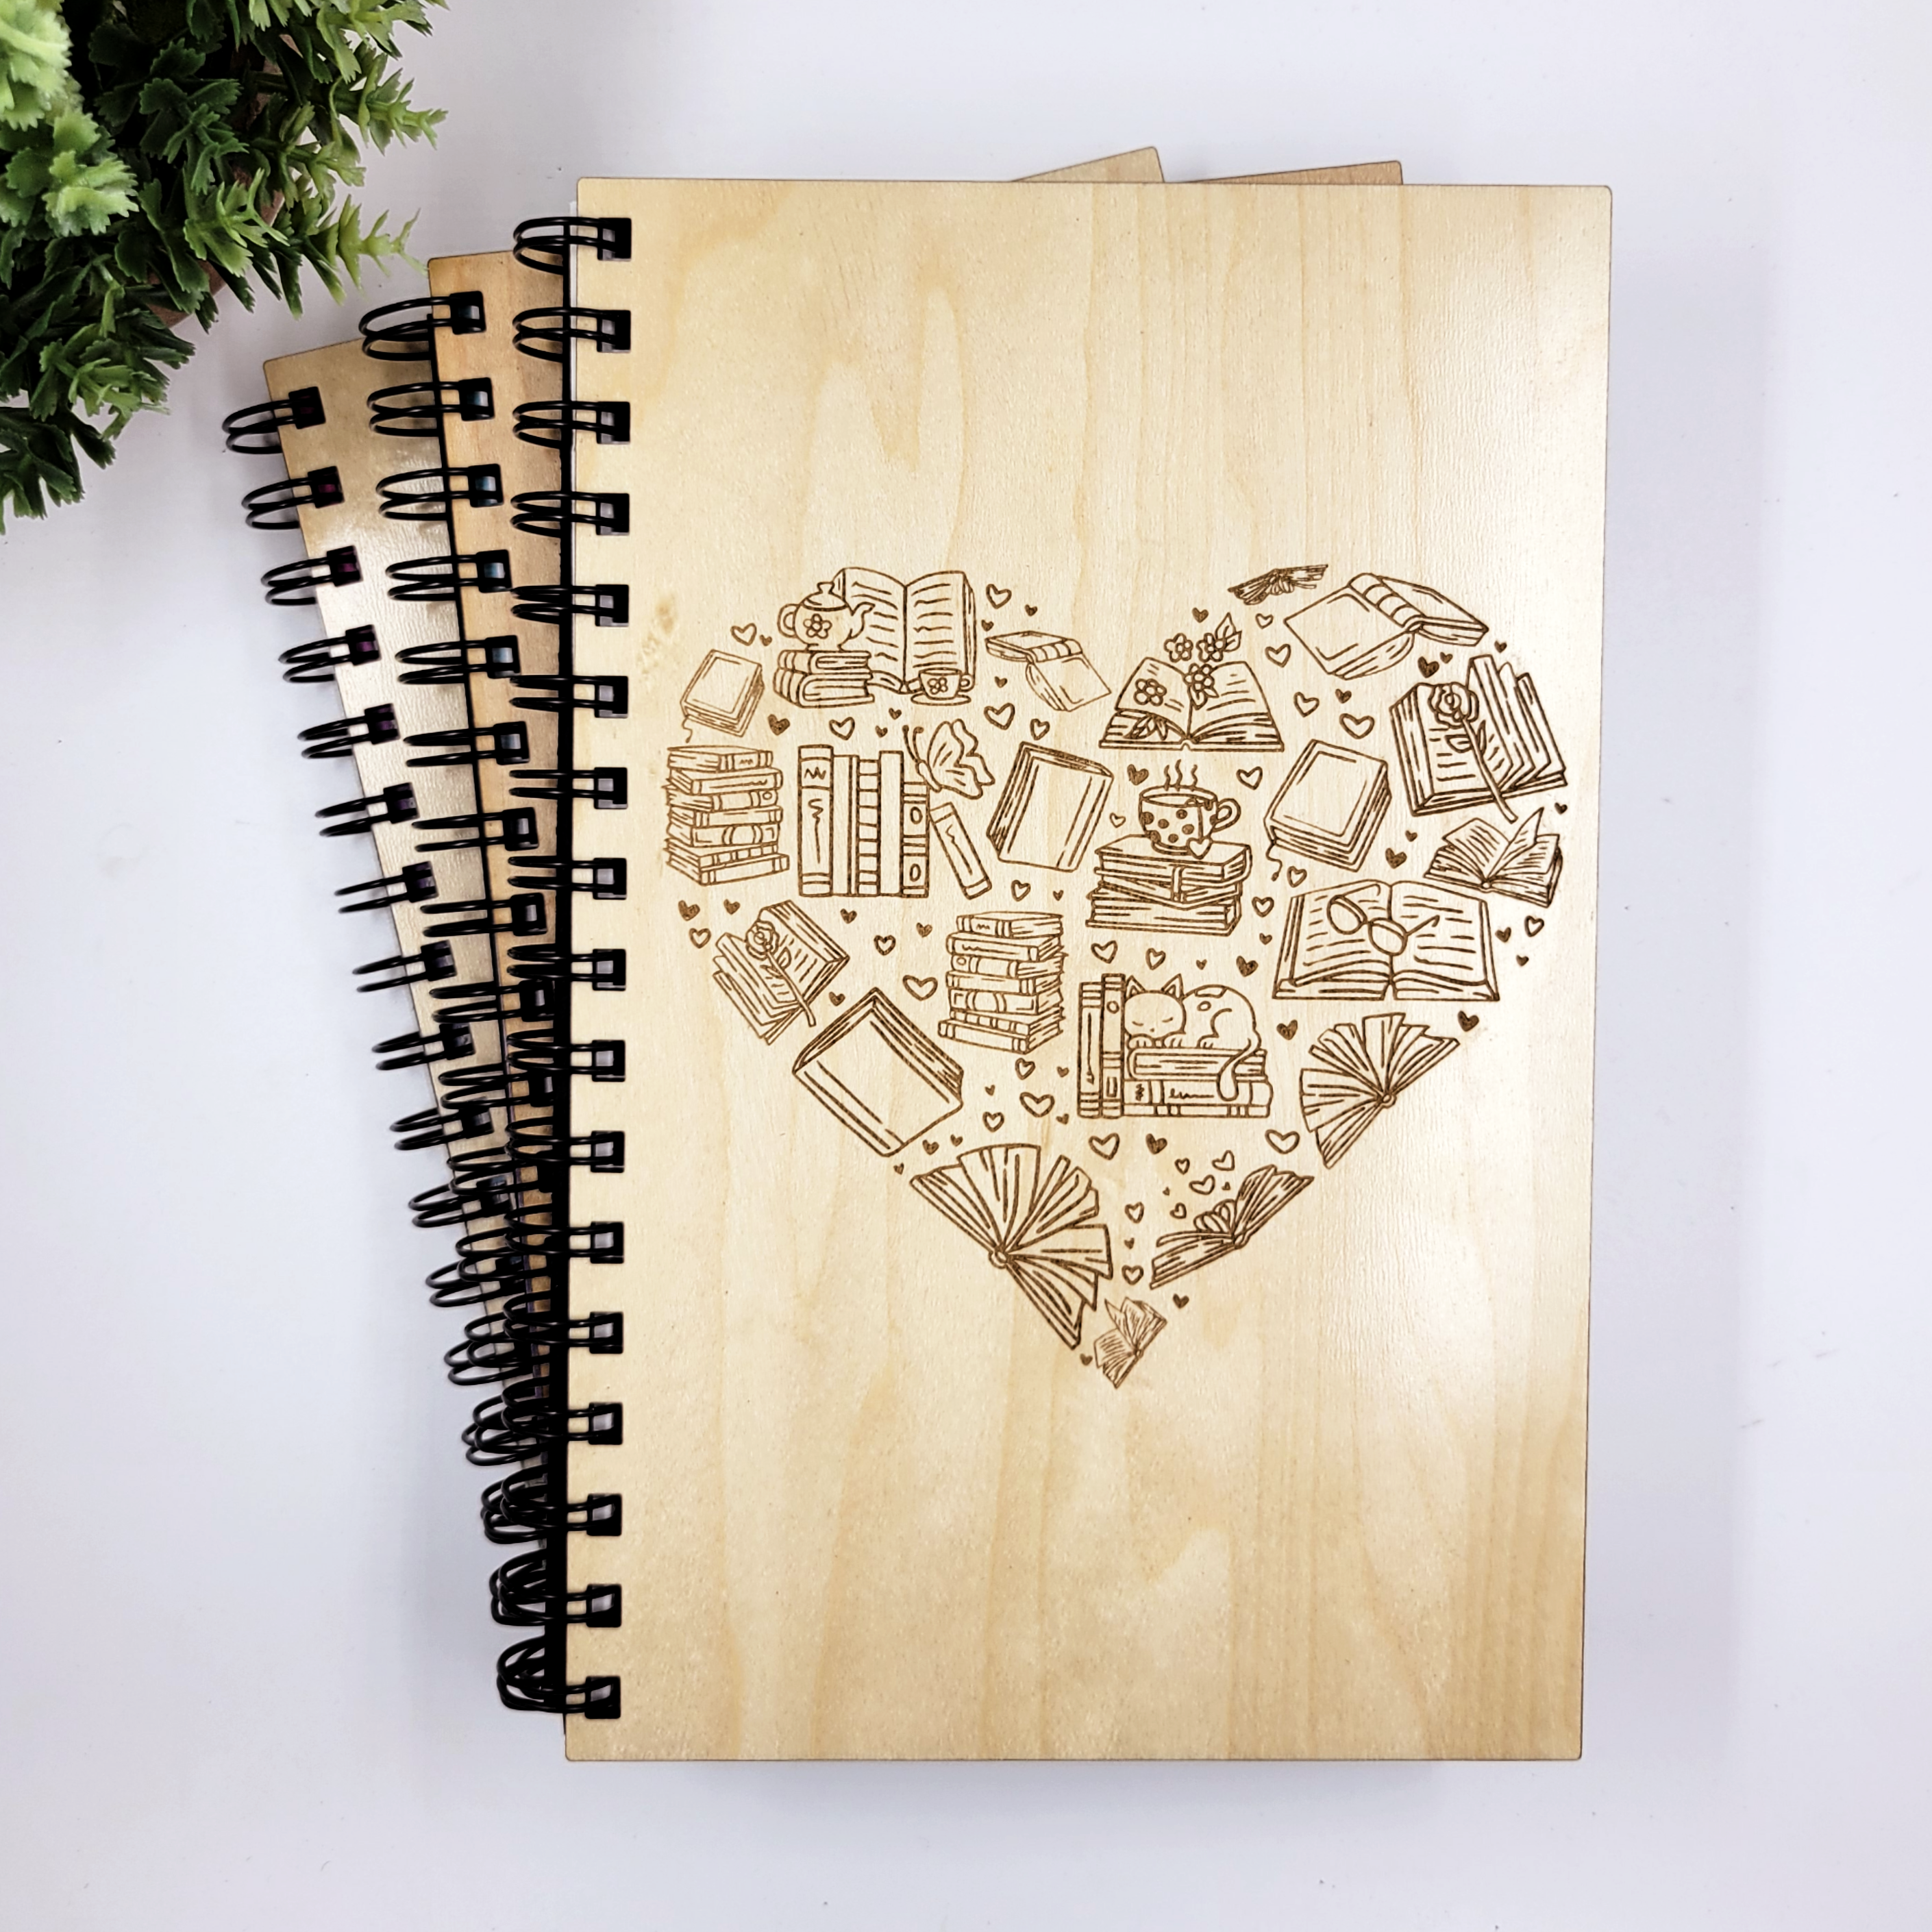 Creative Notetaking Kit – Bumble and Birch - Stationery and Gifts